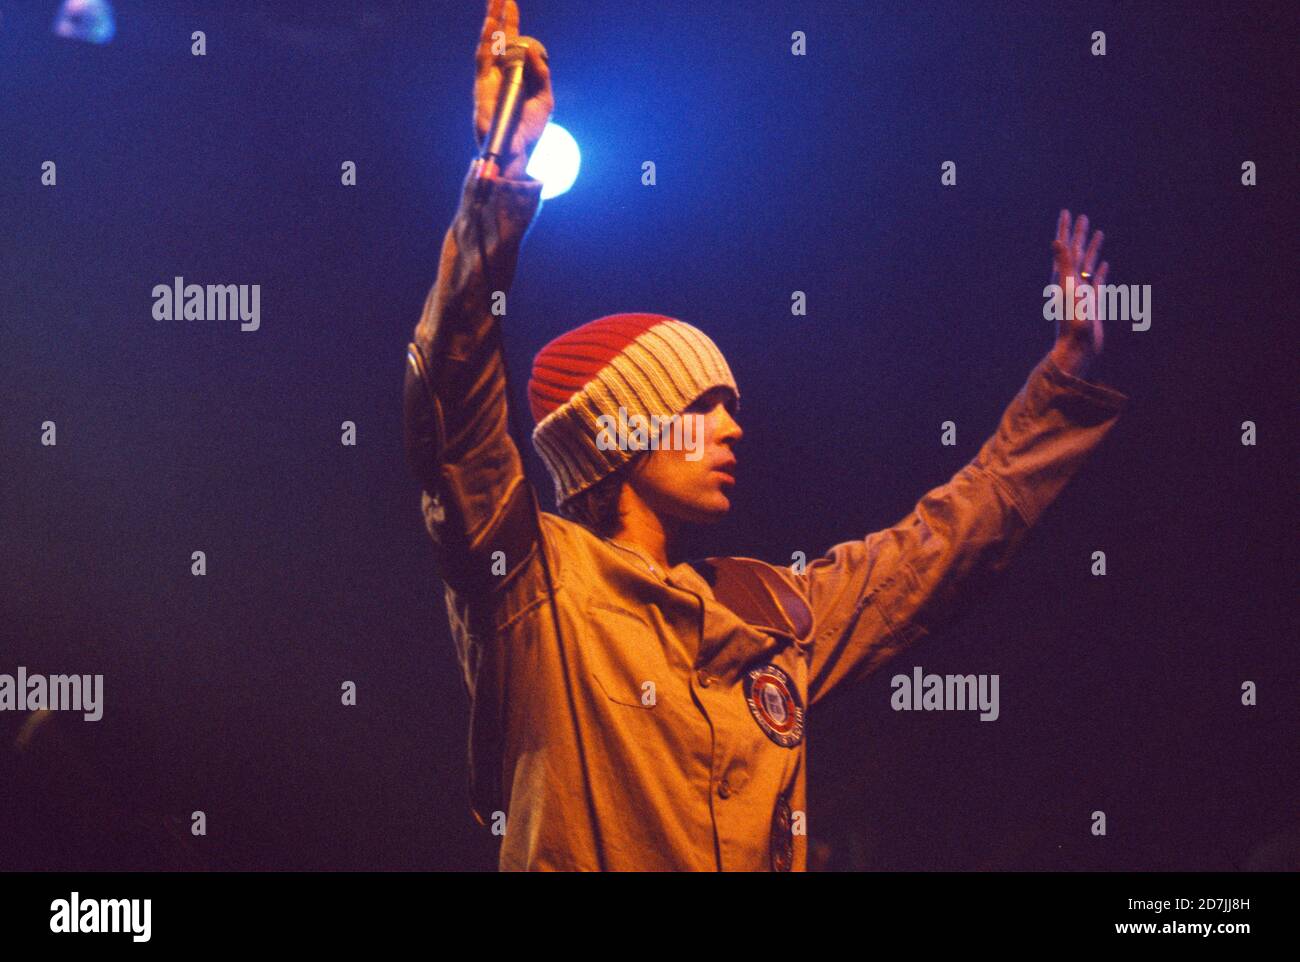 Ian Brown Bape Jacket High Resolution Stock Photography and Images - Alamy